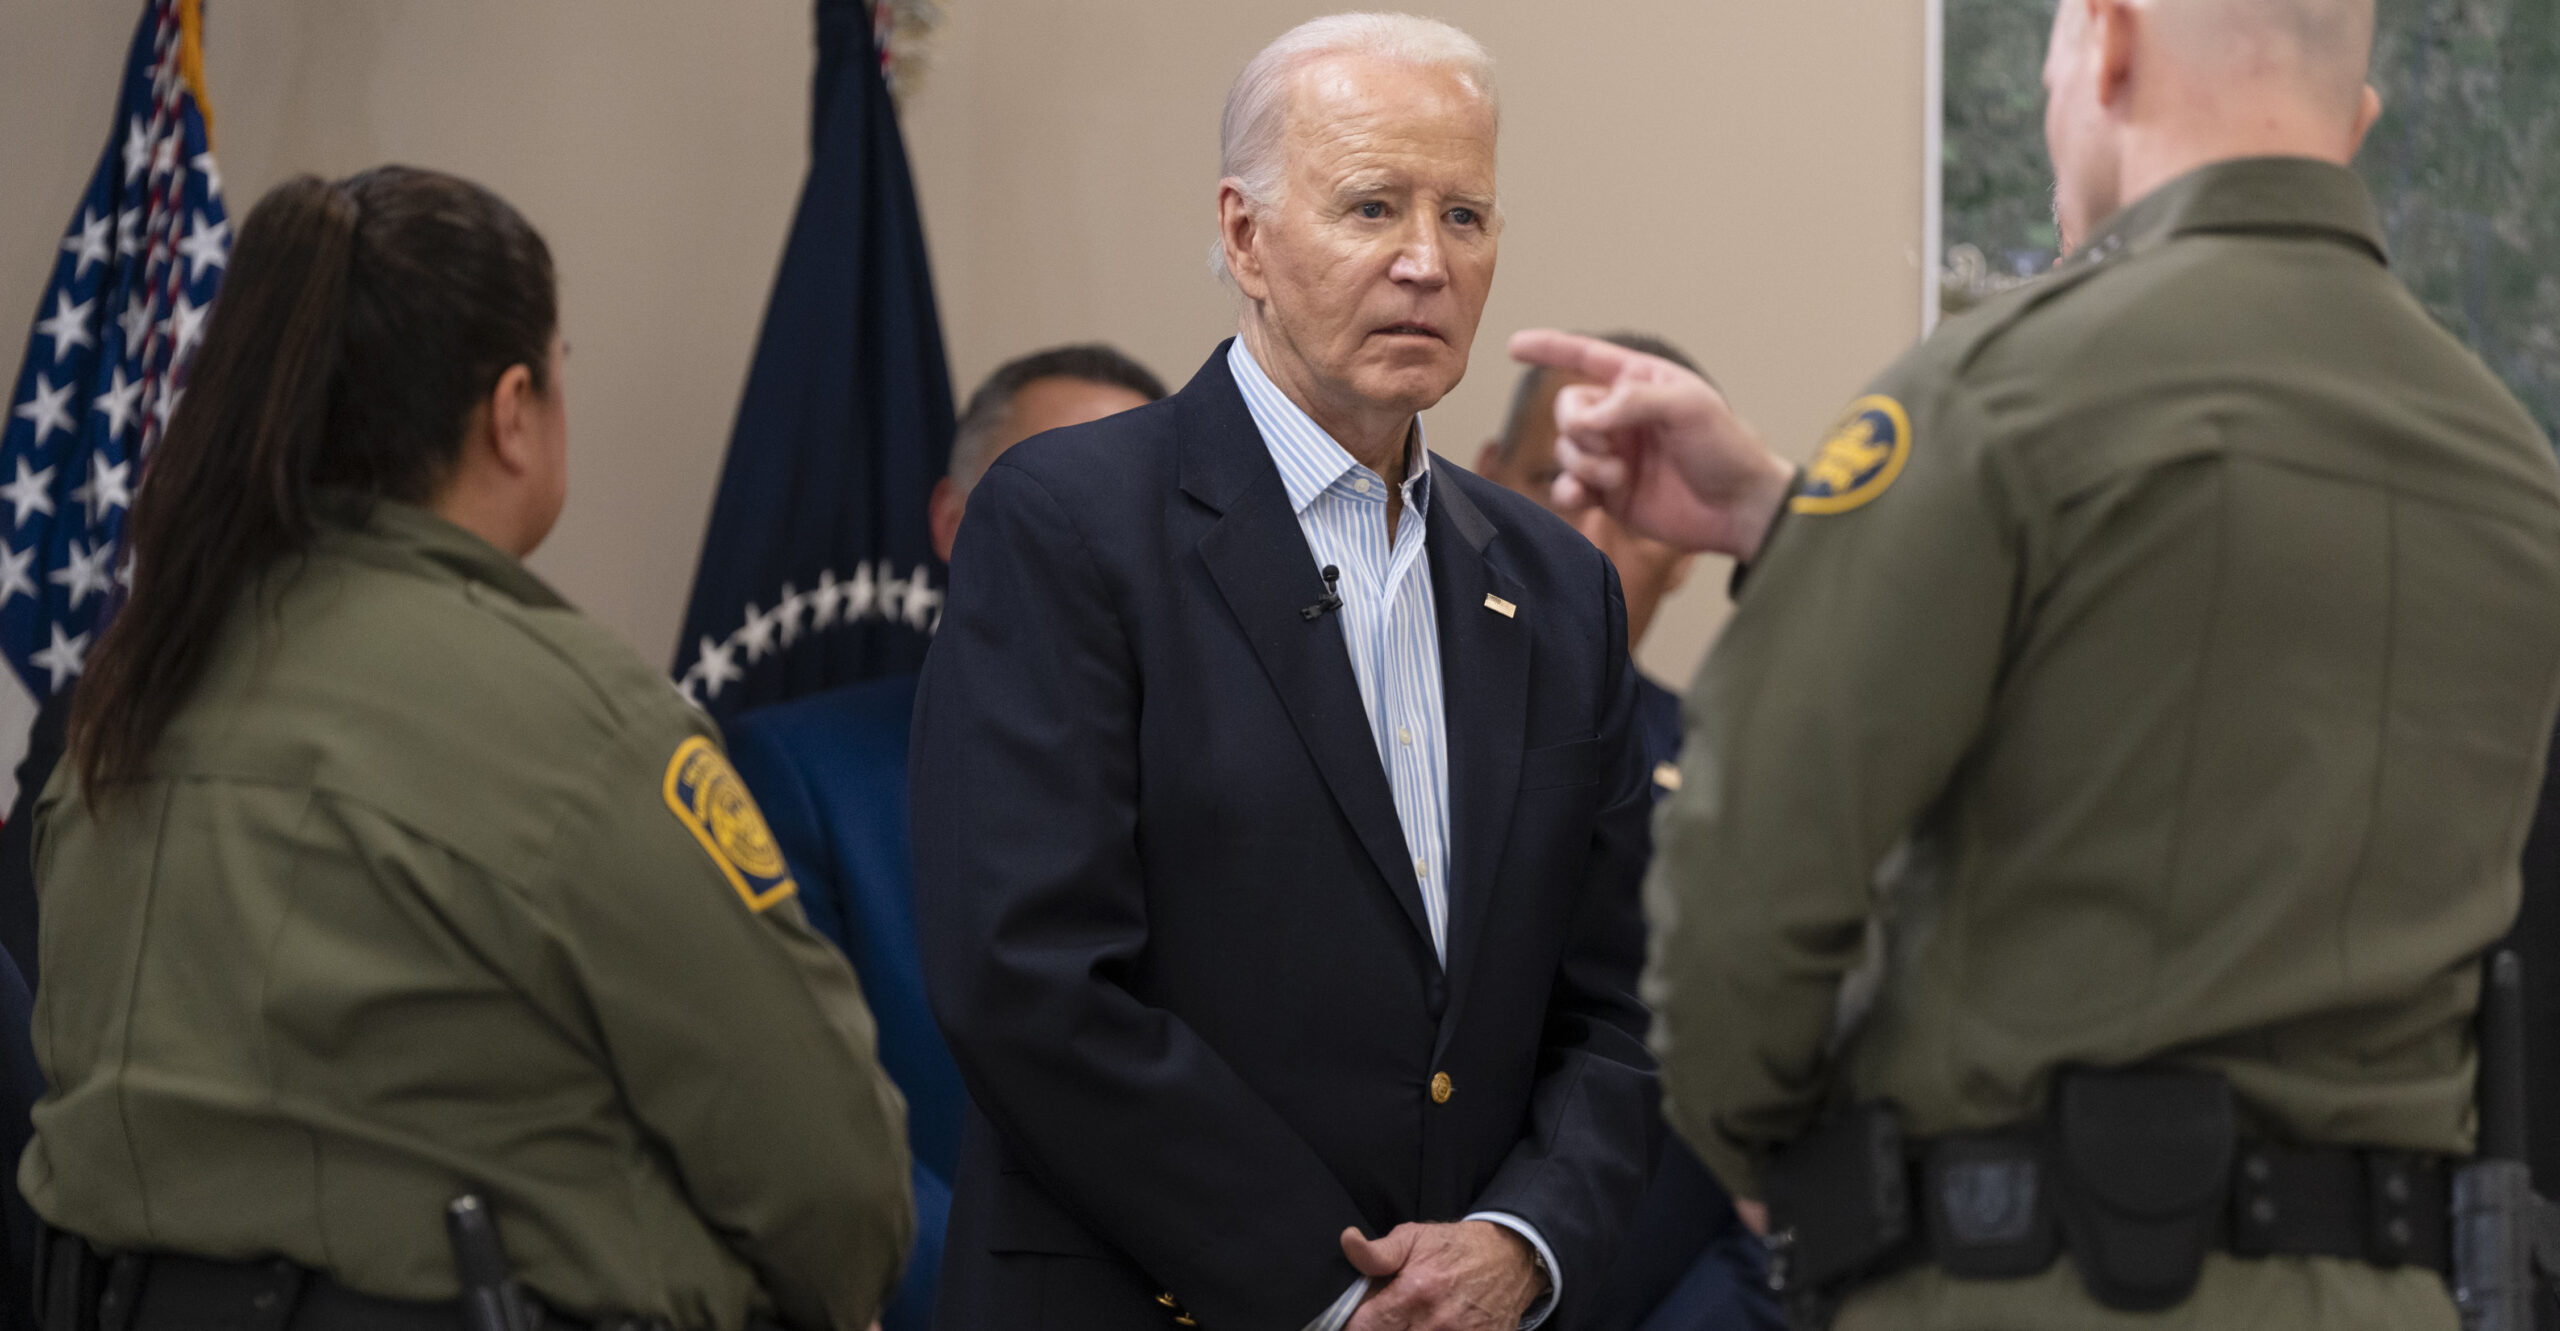 Mexican NGO With Pro-Biden Flyers Also Allowed Anti-Trump Display, Images Show